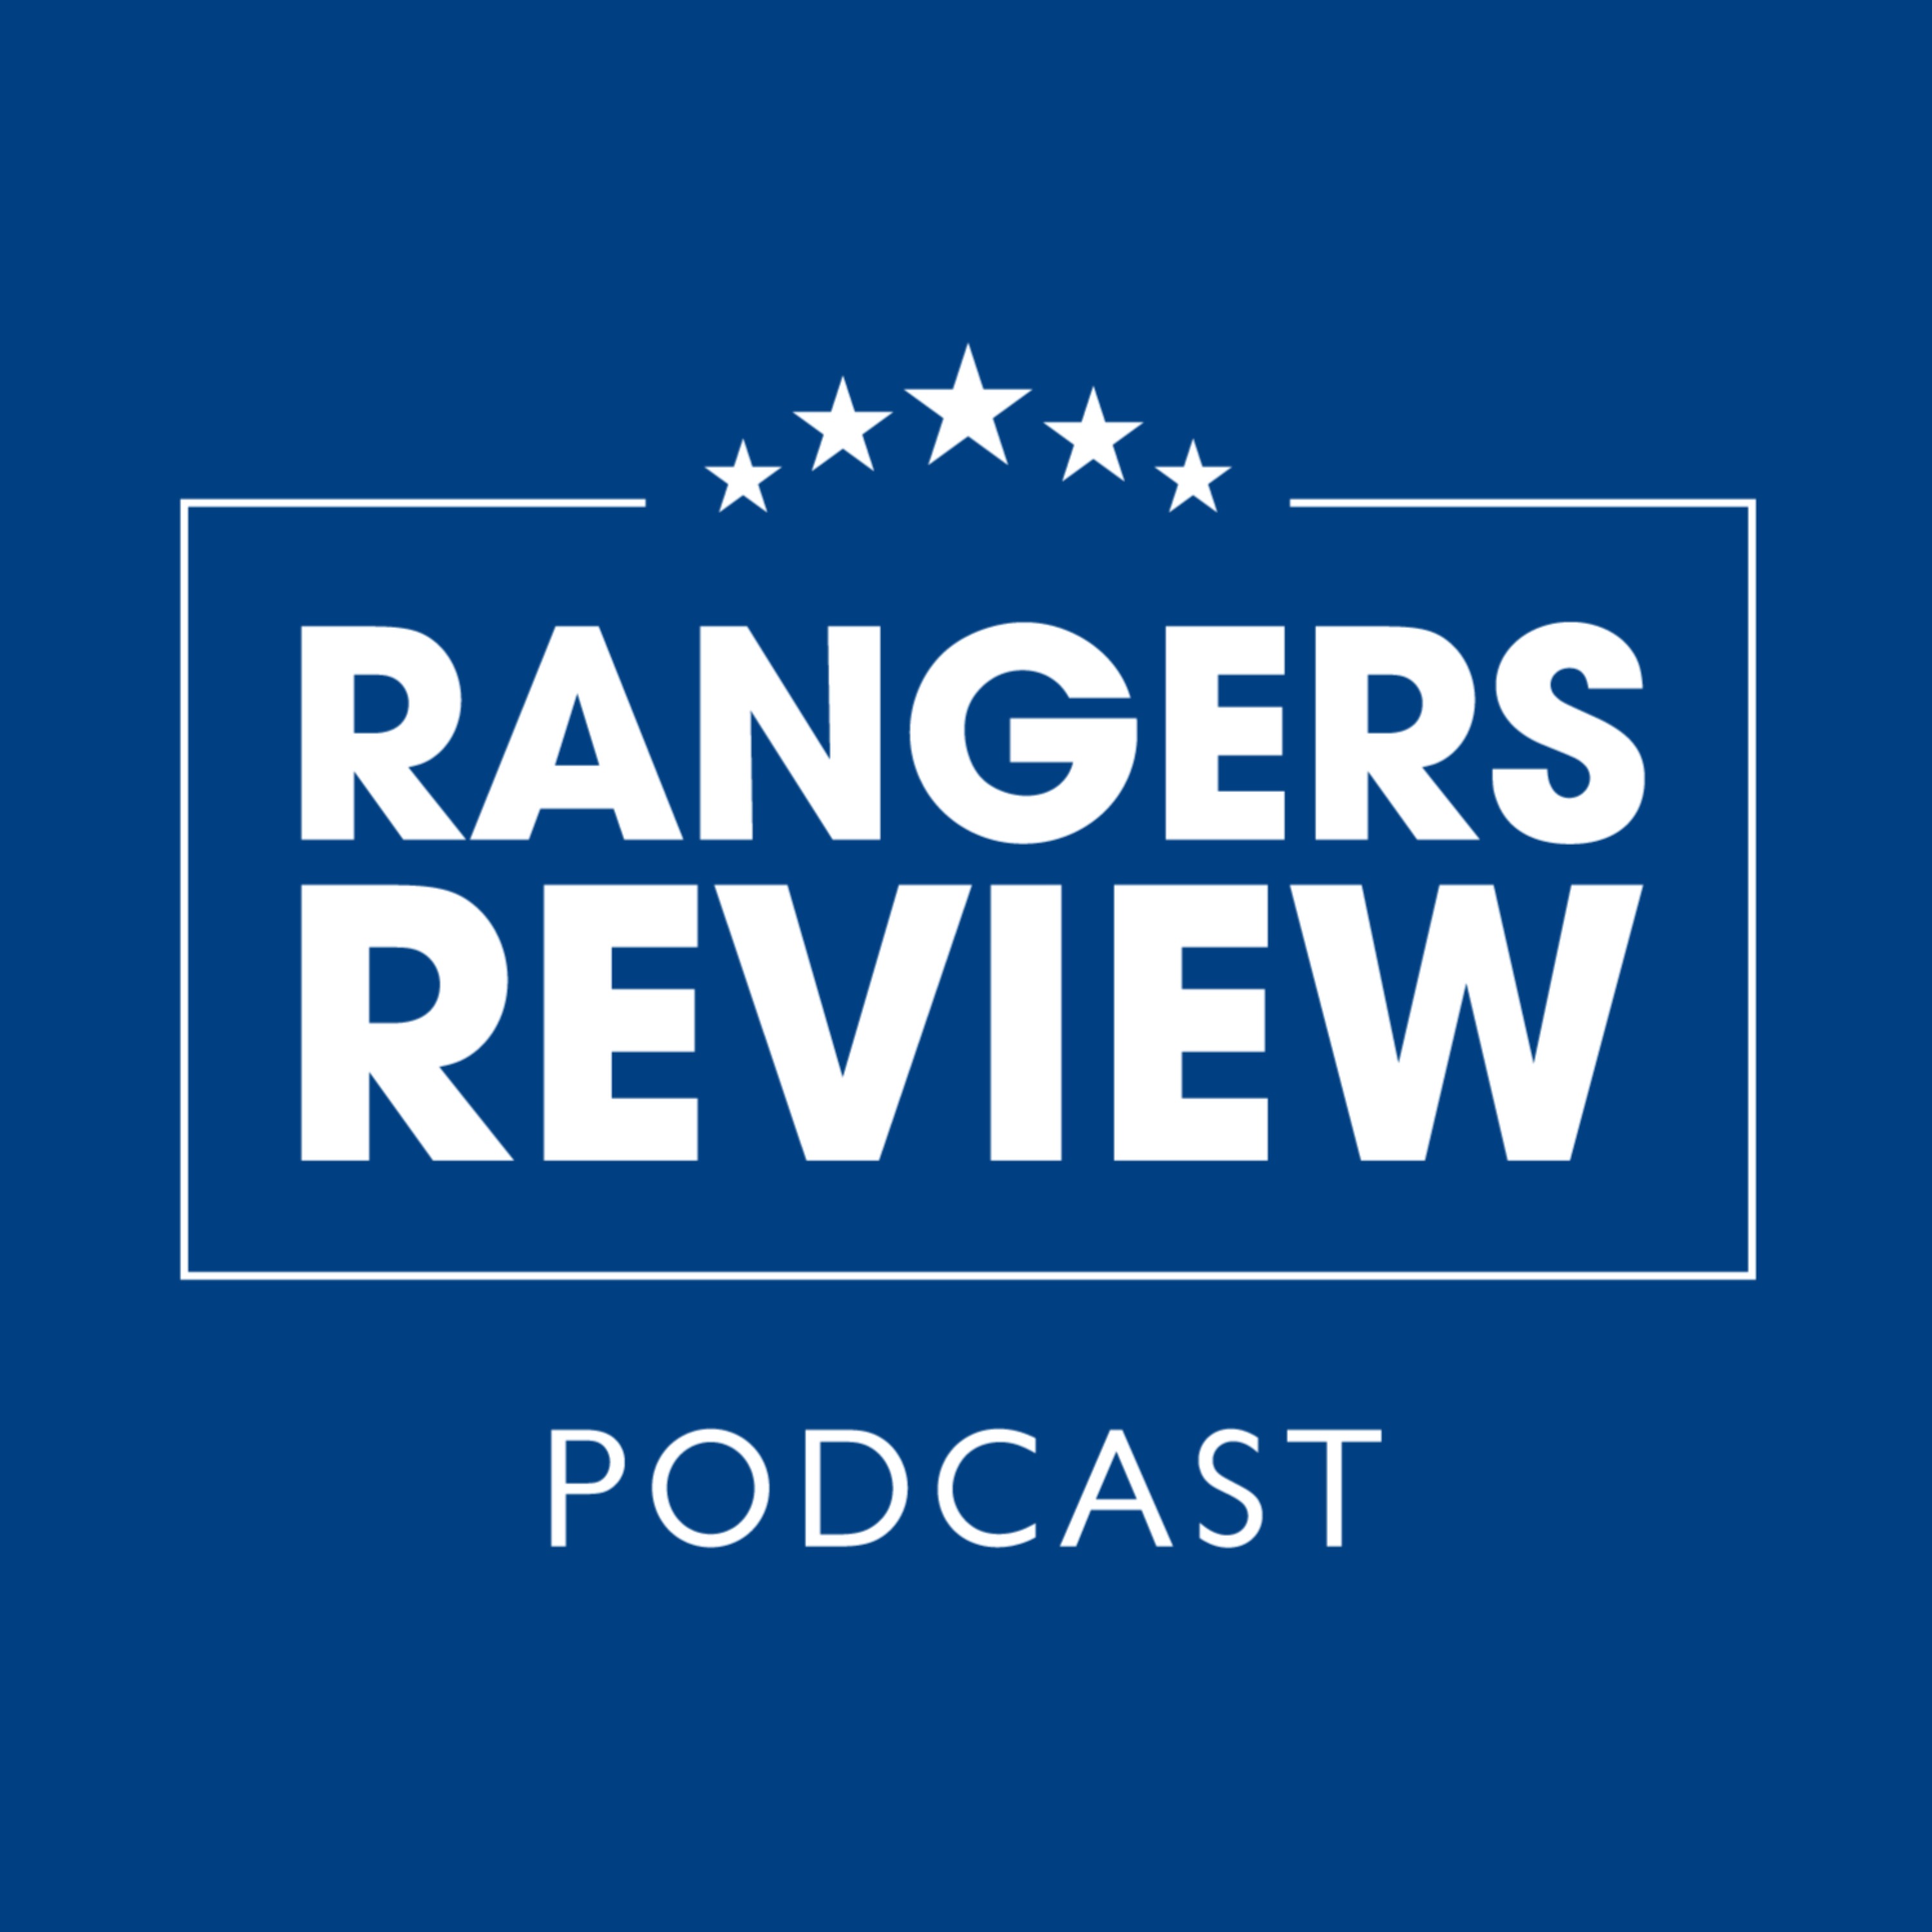 Are Rangers latest Hall of Fame inductees deserved?